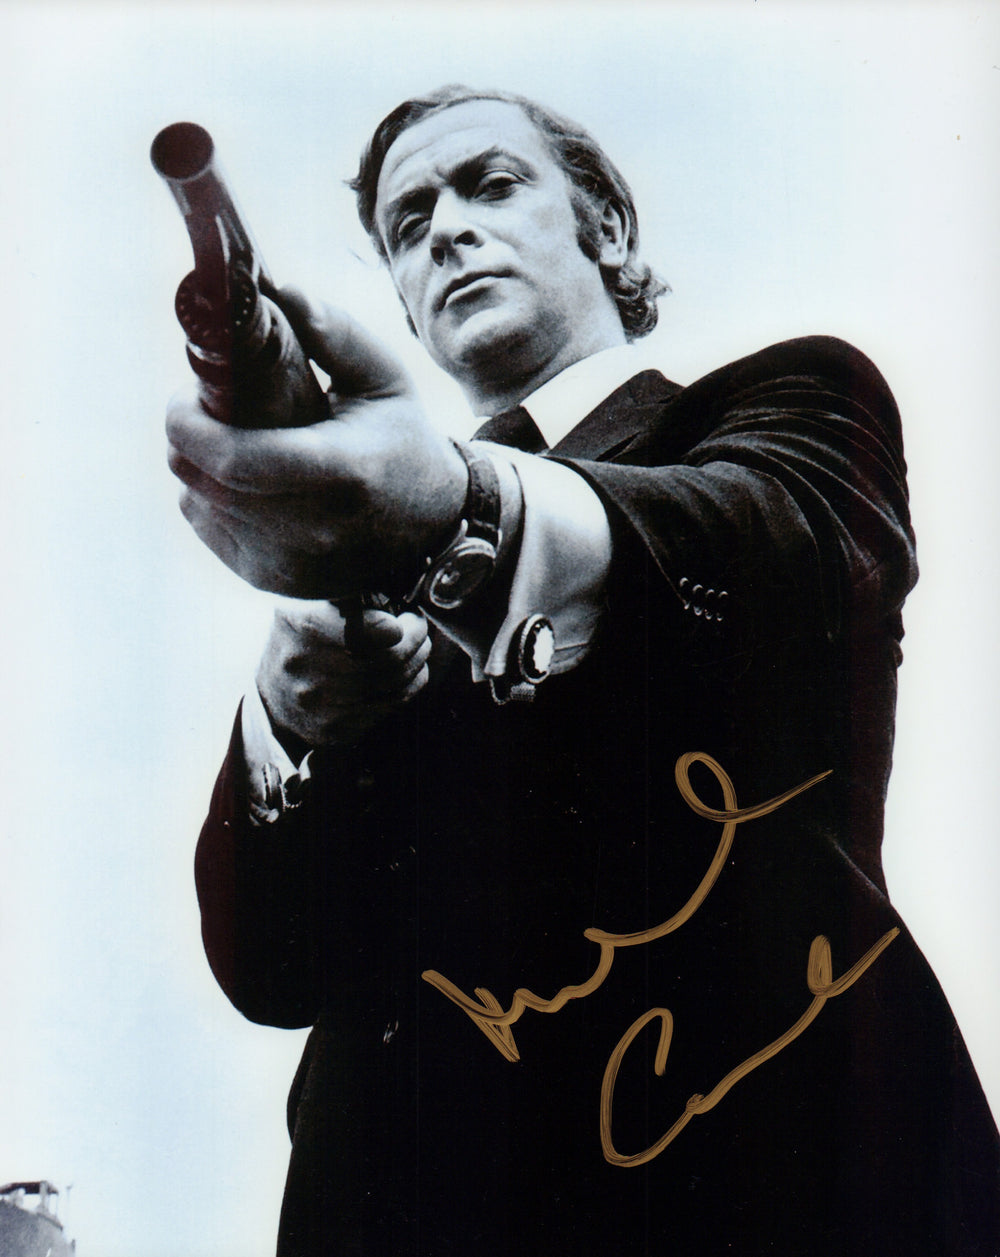 Michael Caine as Jack in Get Carter Signed 8x10 Photo